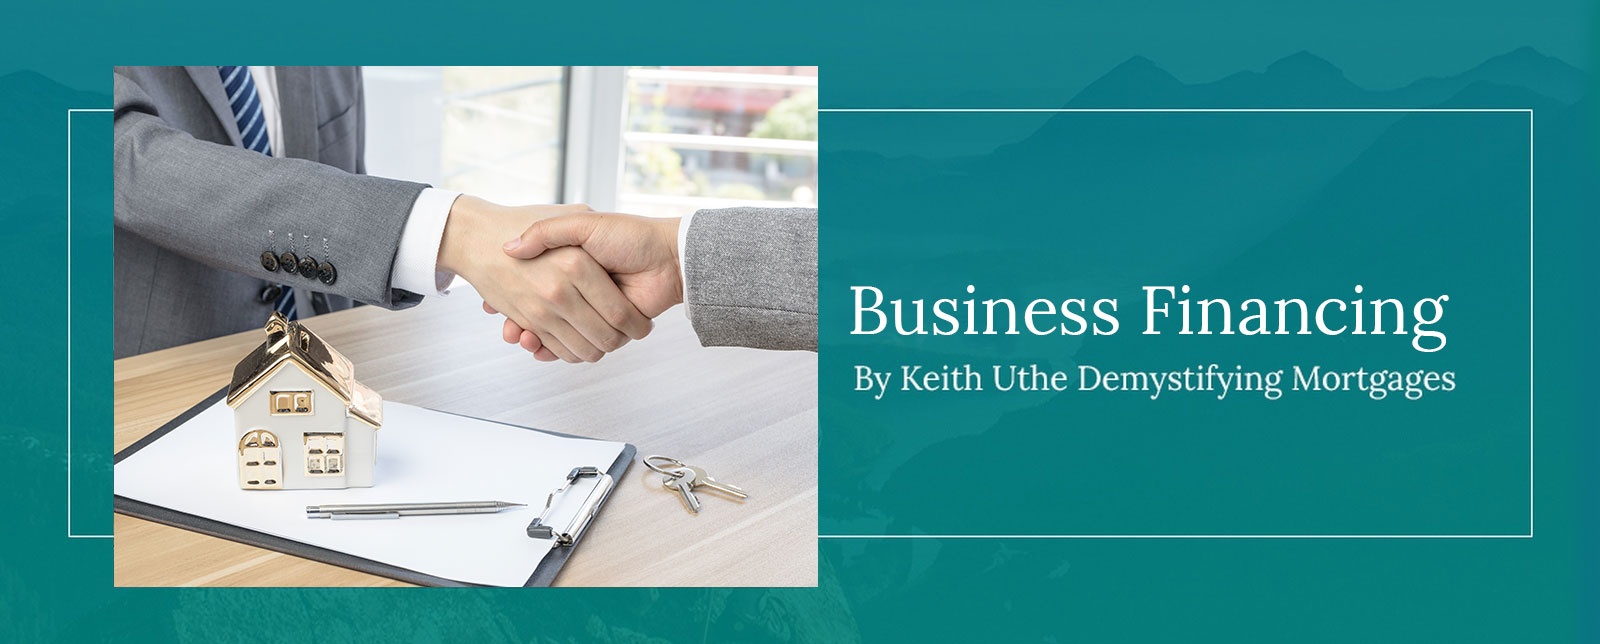 Business Financing Services in Calgary, Edmonton, Alberta by Keith Uthe Demystifying Mortgages